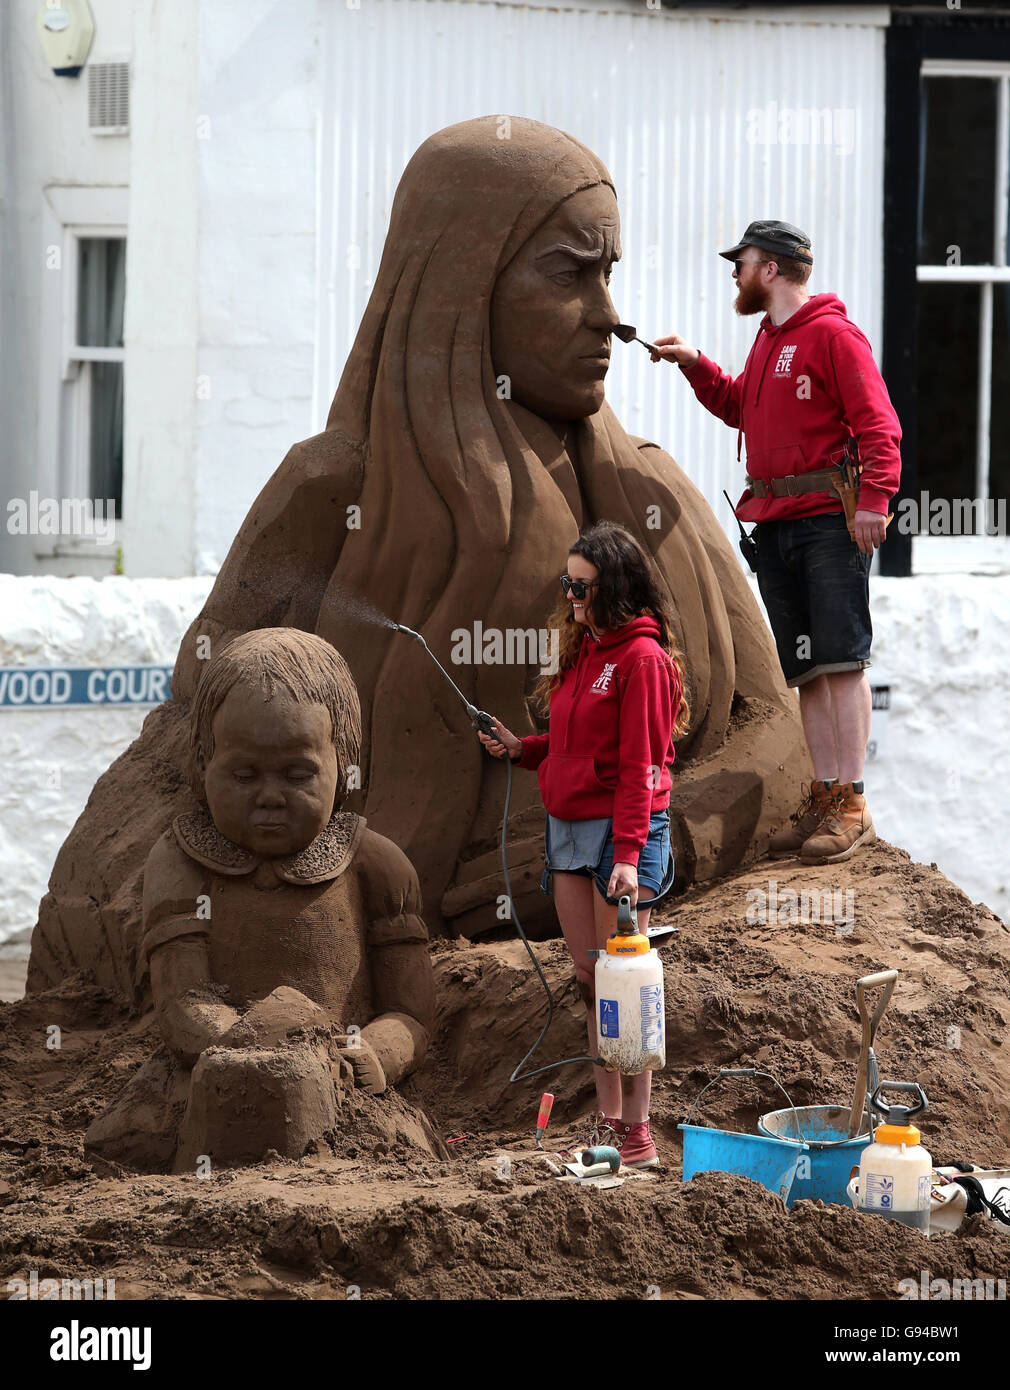 Artists Claire Jamieson and Jamie Wardley put the finishing touches to a  life size sand sculpture titled "Those Left Behind" by the Sand In Your Eye  team, as a commemorative event takes